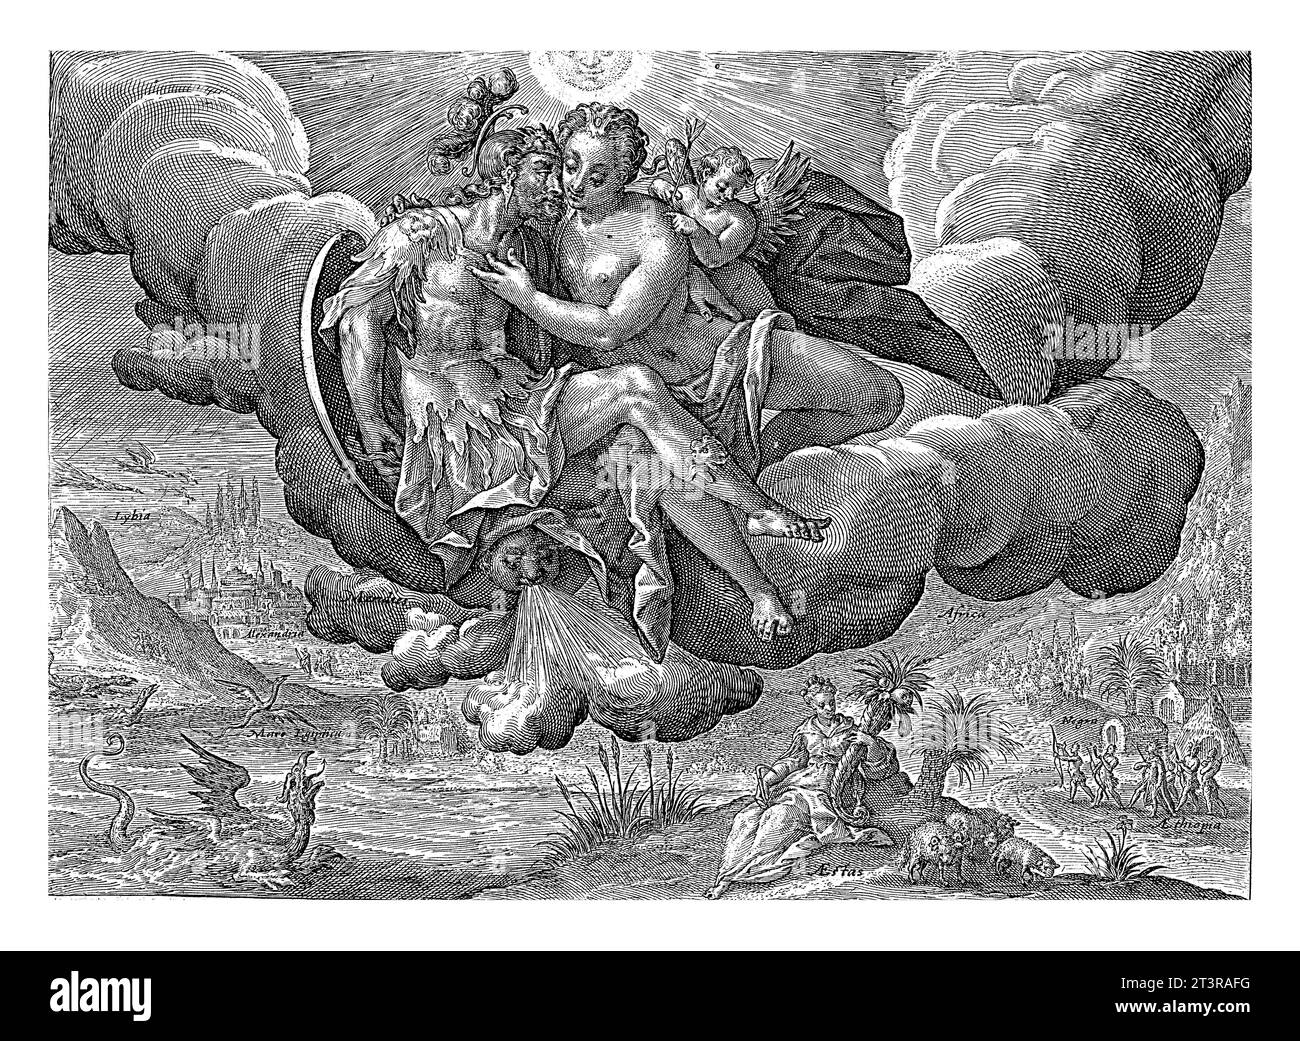 South Wind, Crispijn van de Passe (I), 1589 - 1611 Cloud cover with Mars and Venus as a loving couple, personifying the South Wind (Auster). Venus is Stock Photo